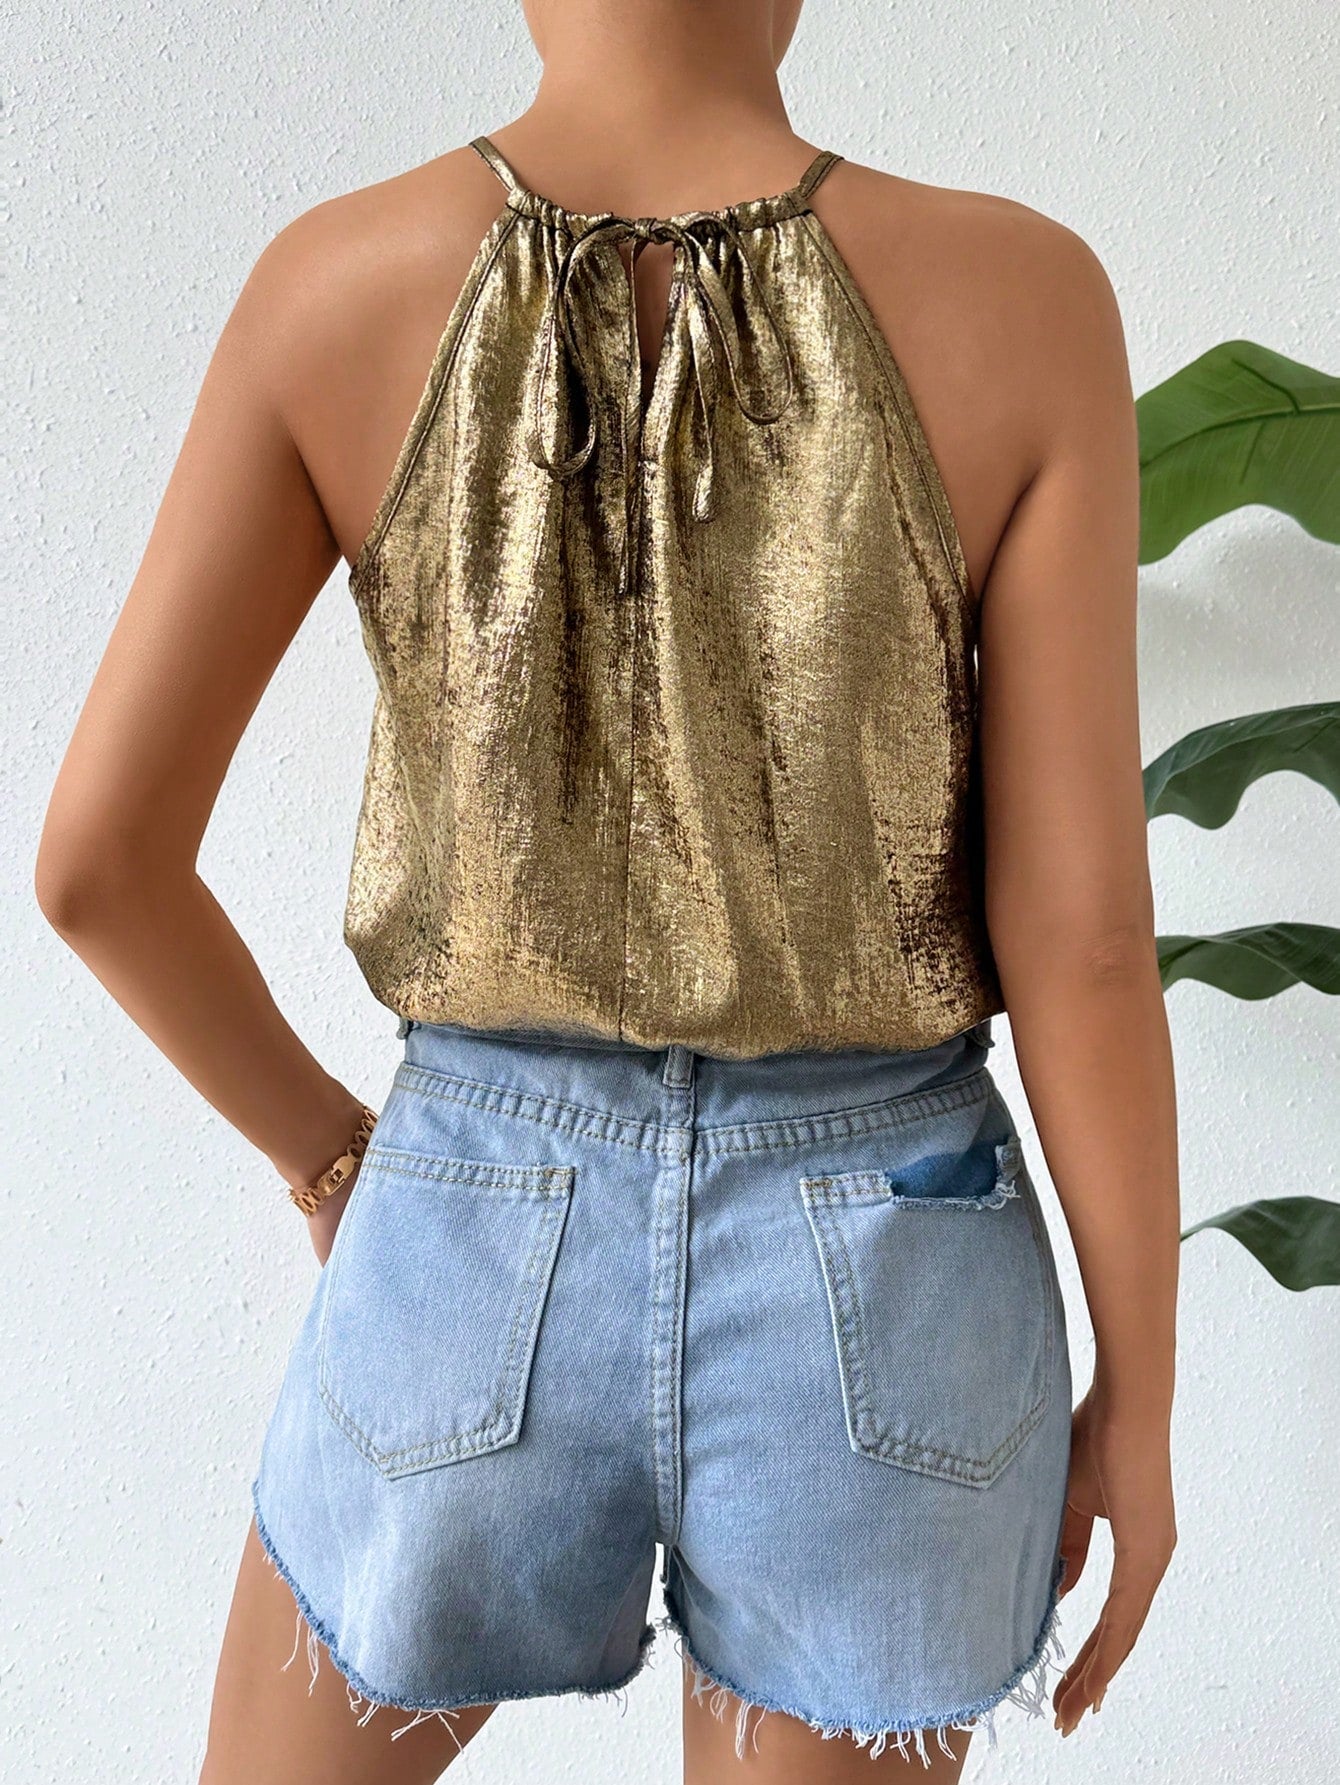 Black and gold sequin bodysuit view from behind